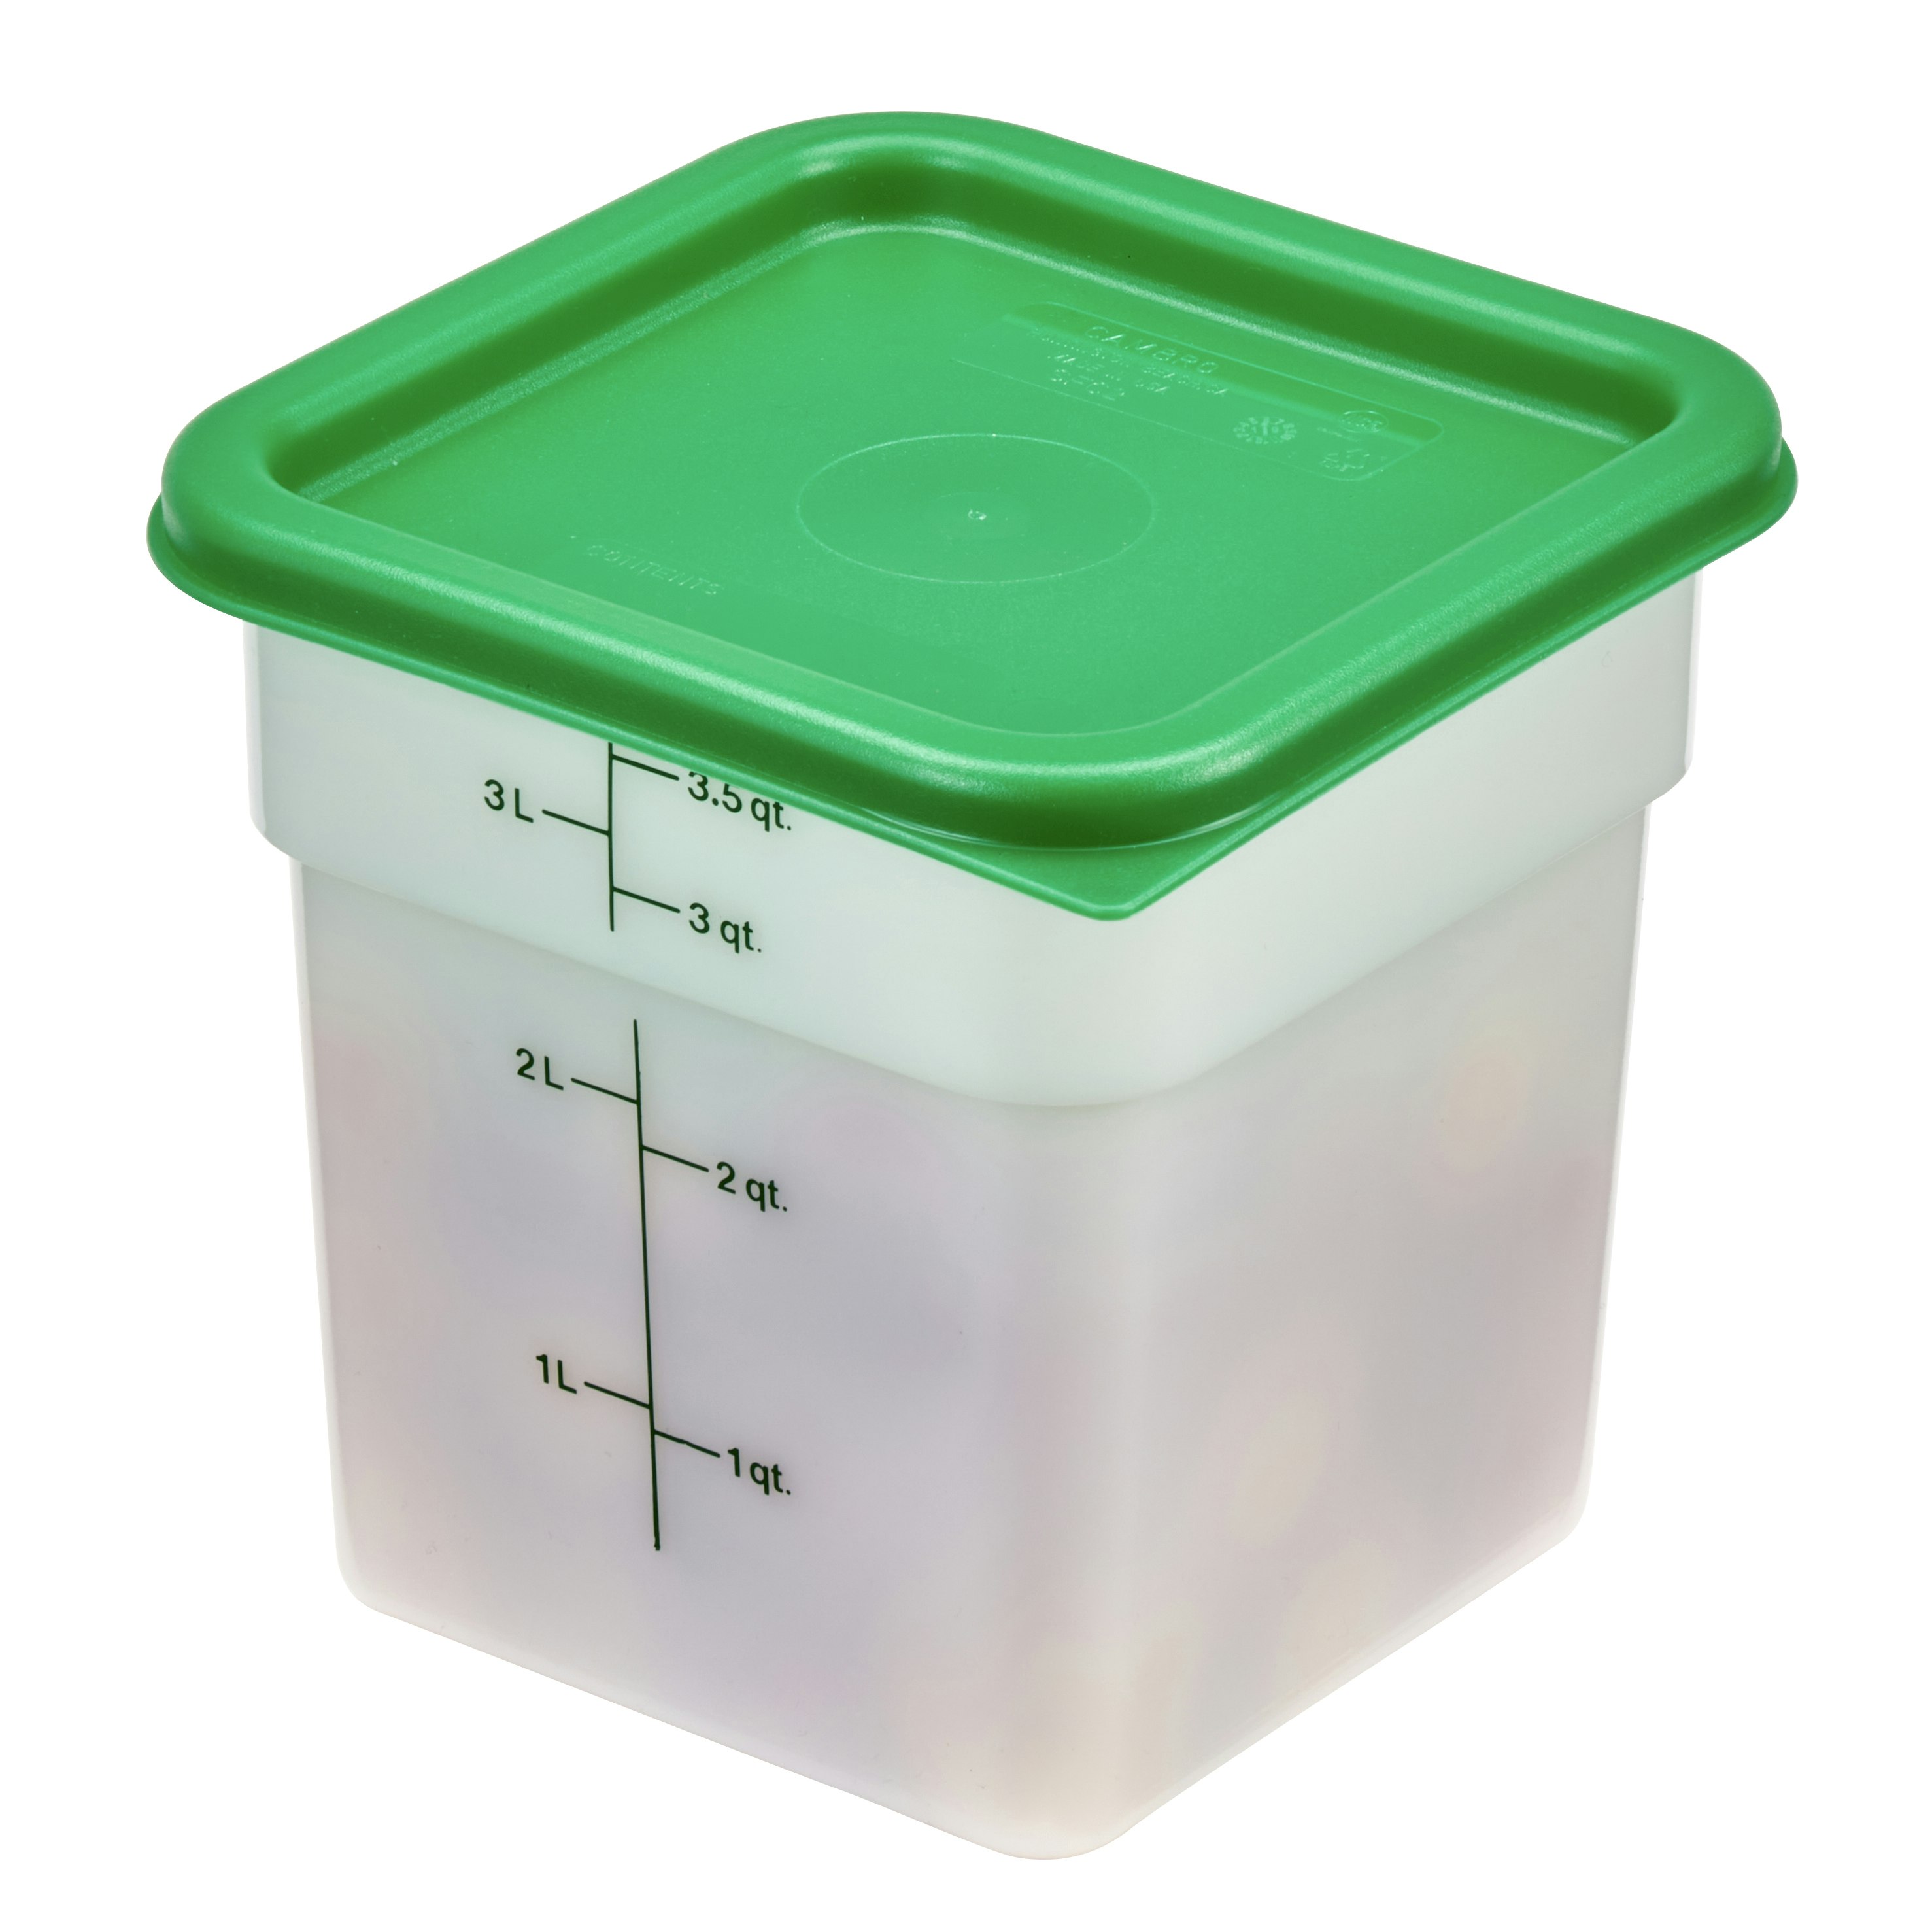  Cambro Medium Polyethylene Square Lids, fits 6 and 8 qt.  containers, Pack of 6: Cookware Lids: Home & Kitchen